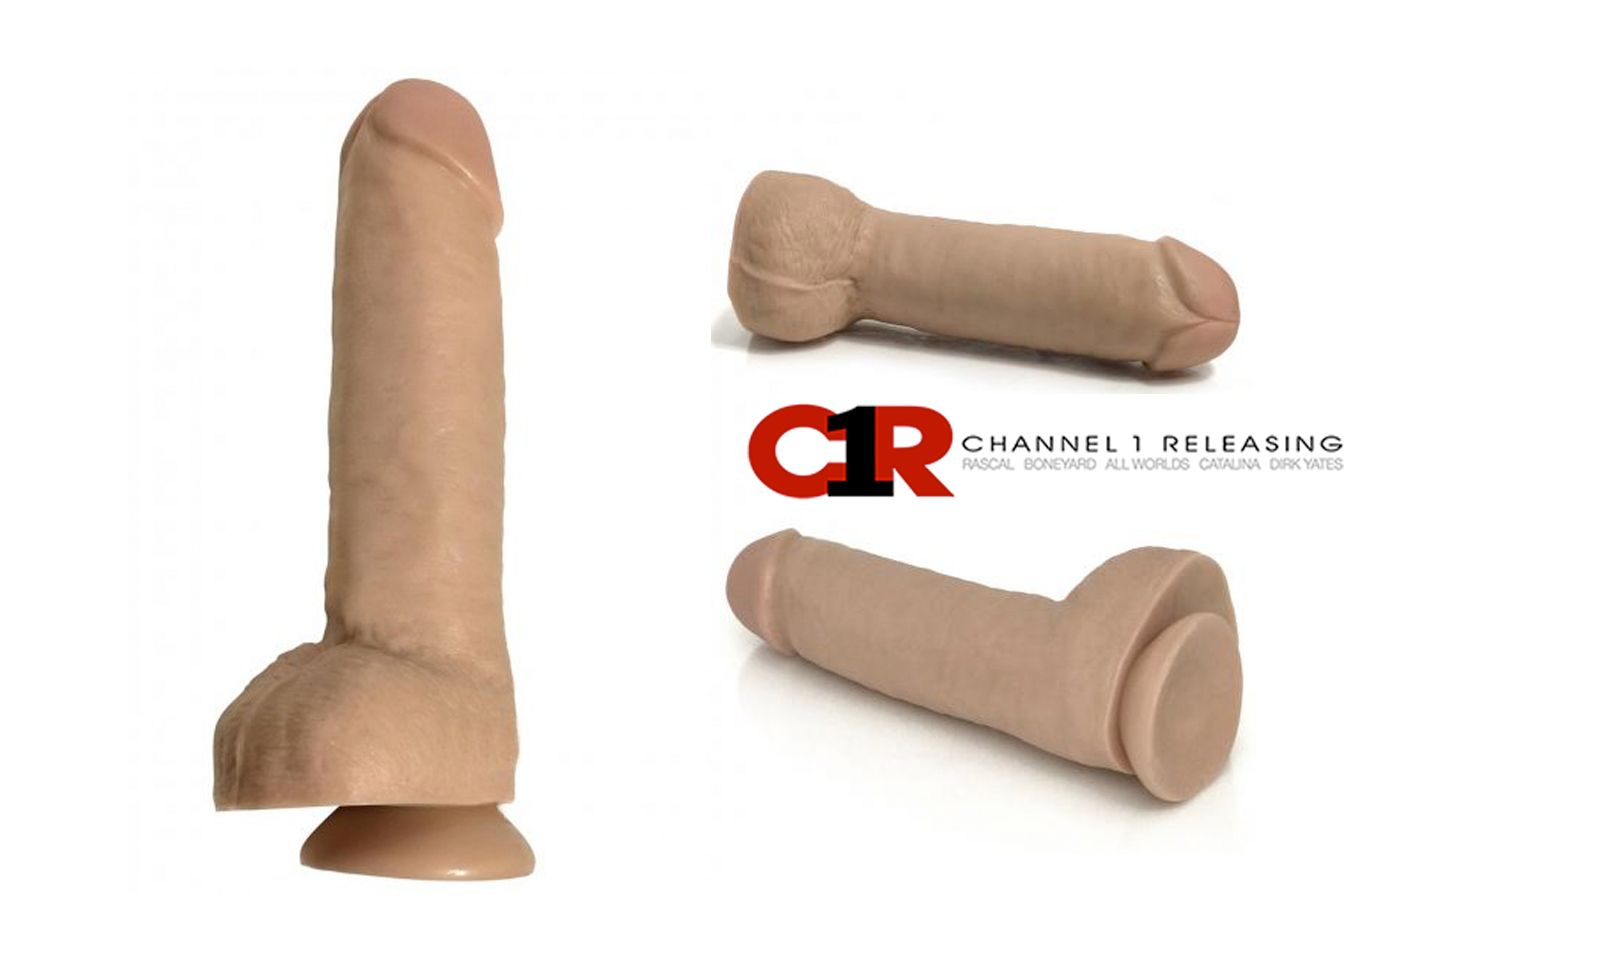 Big White Cock Debuts From C1R's Rascal Toys